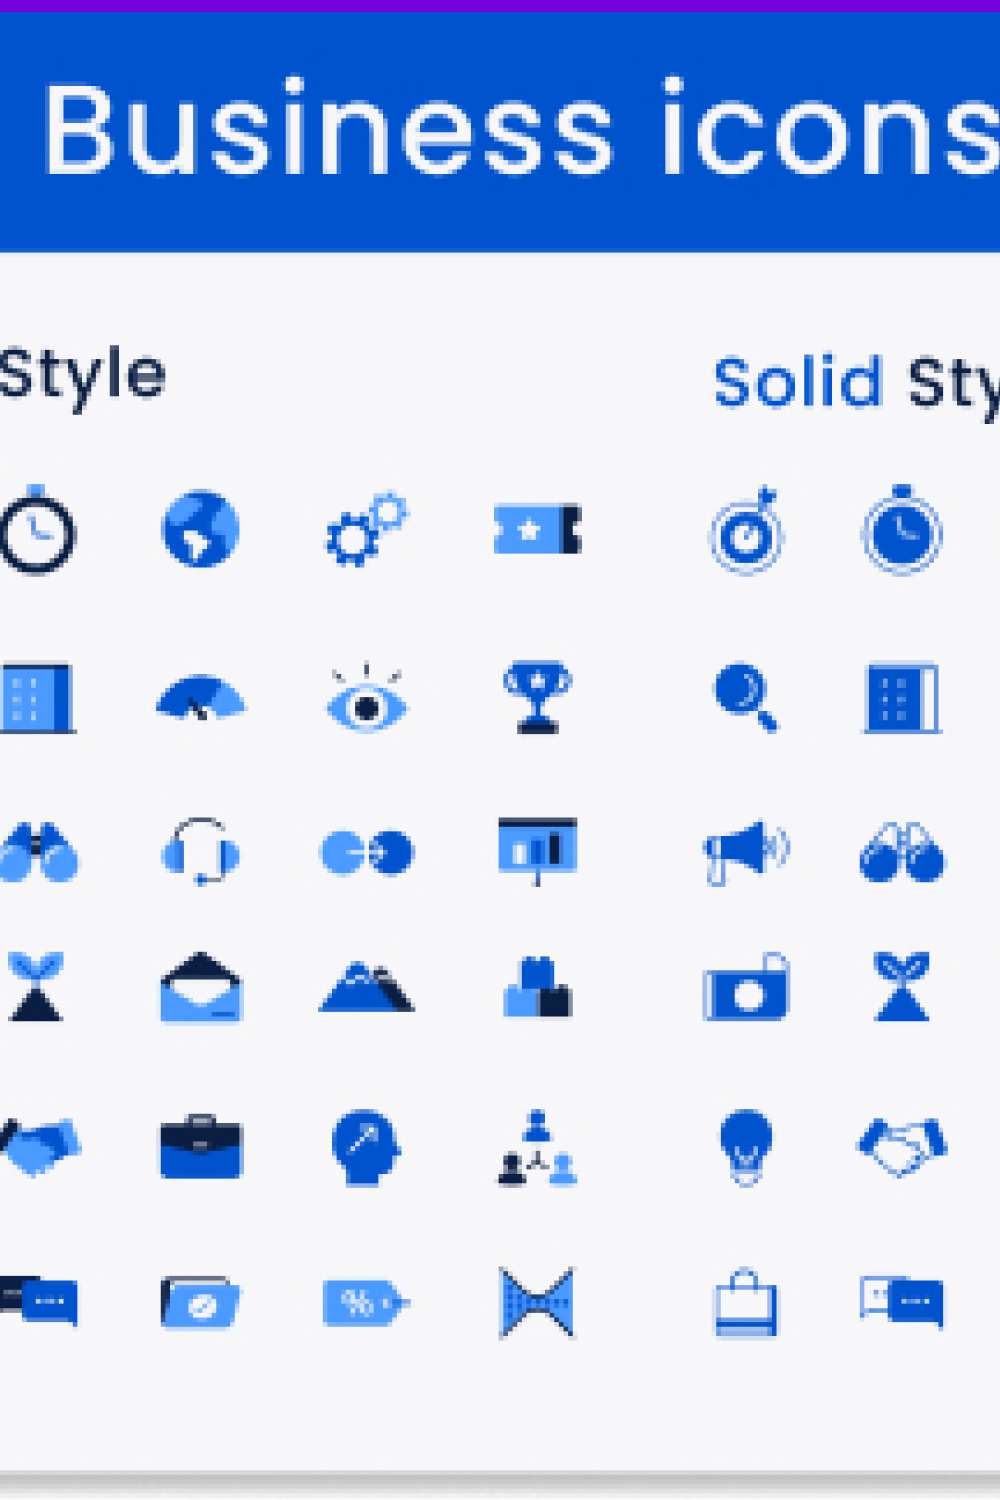 Business Icons Design Solid Style pinterest image.